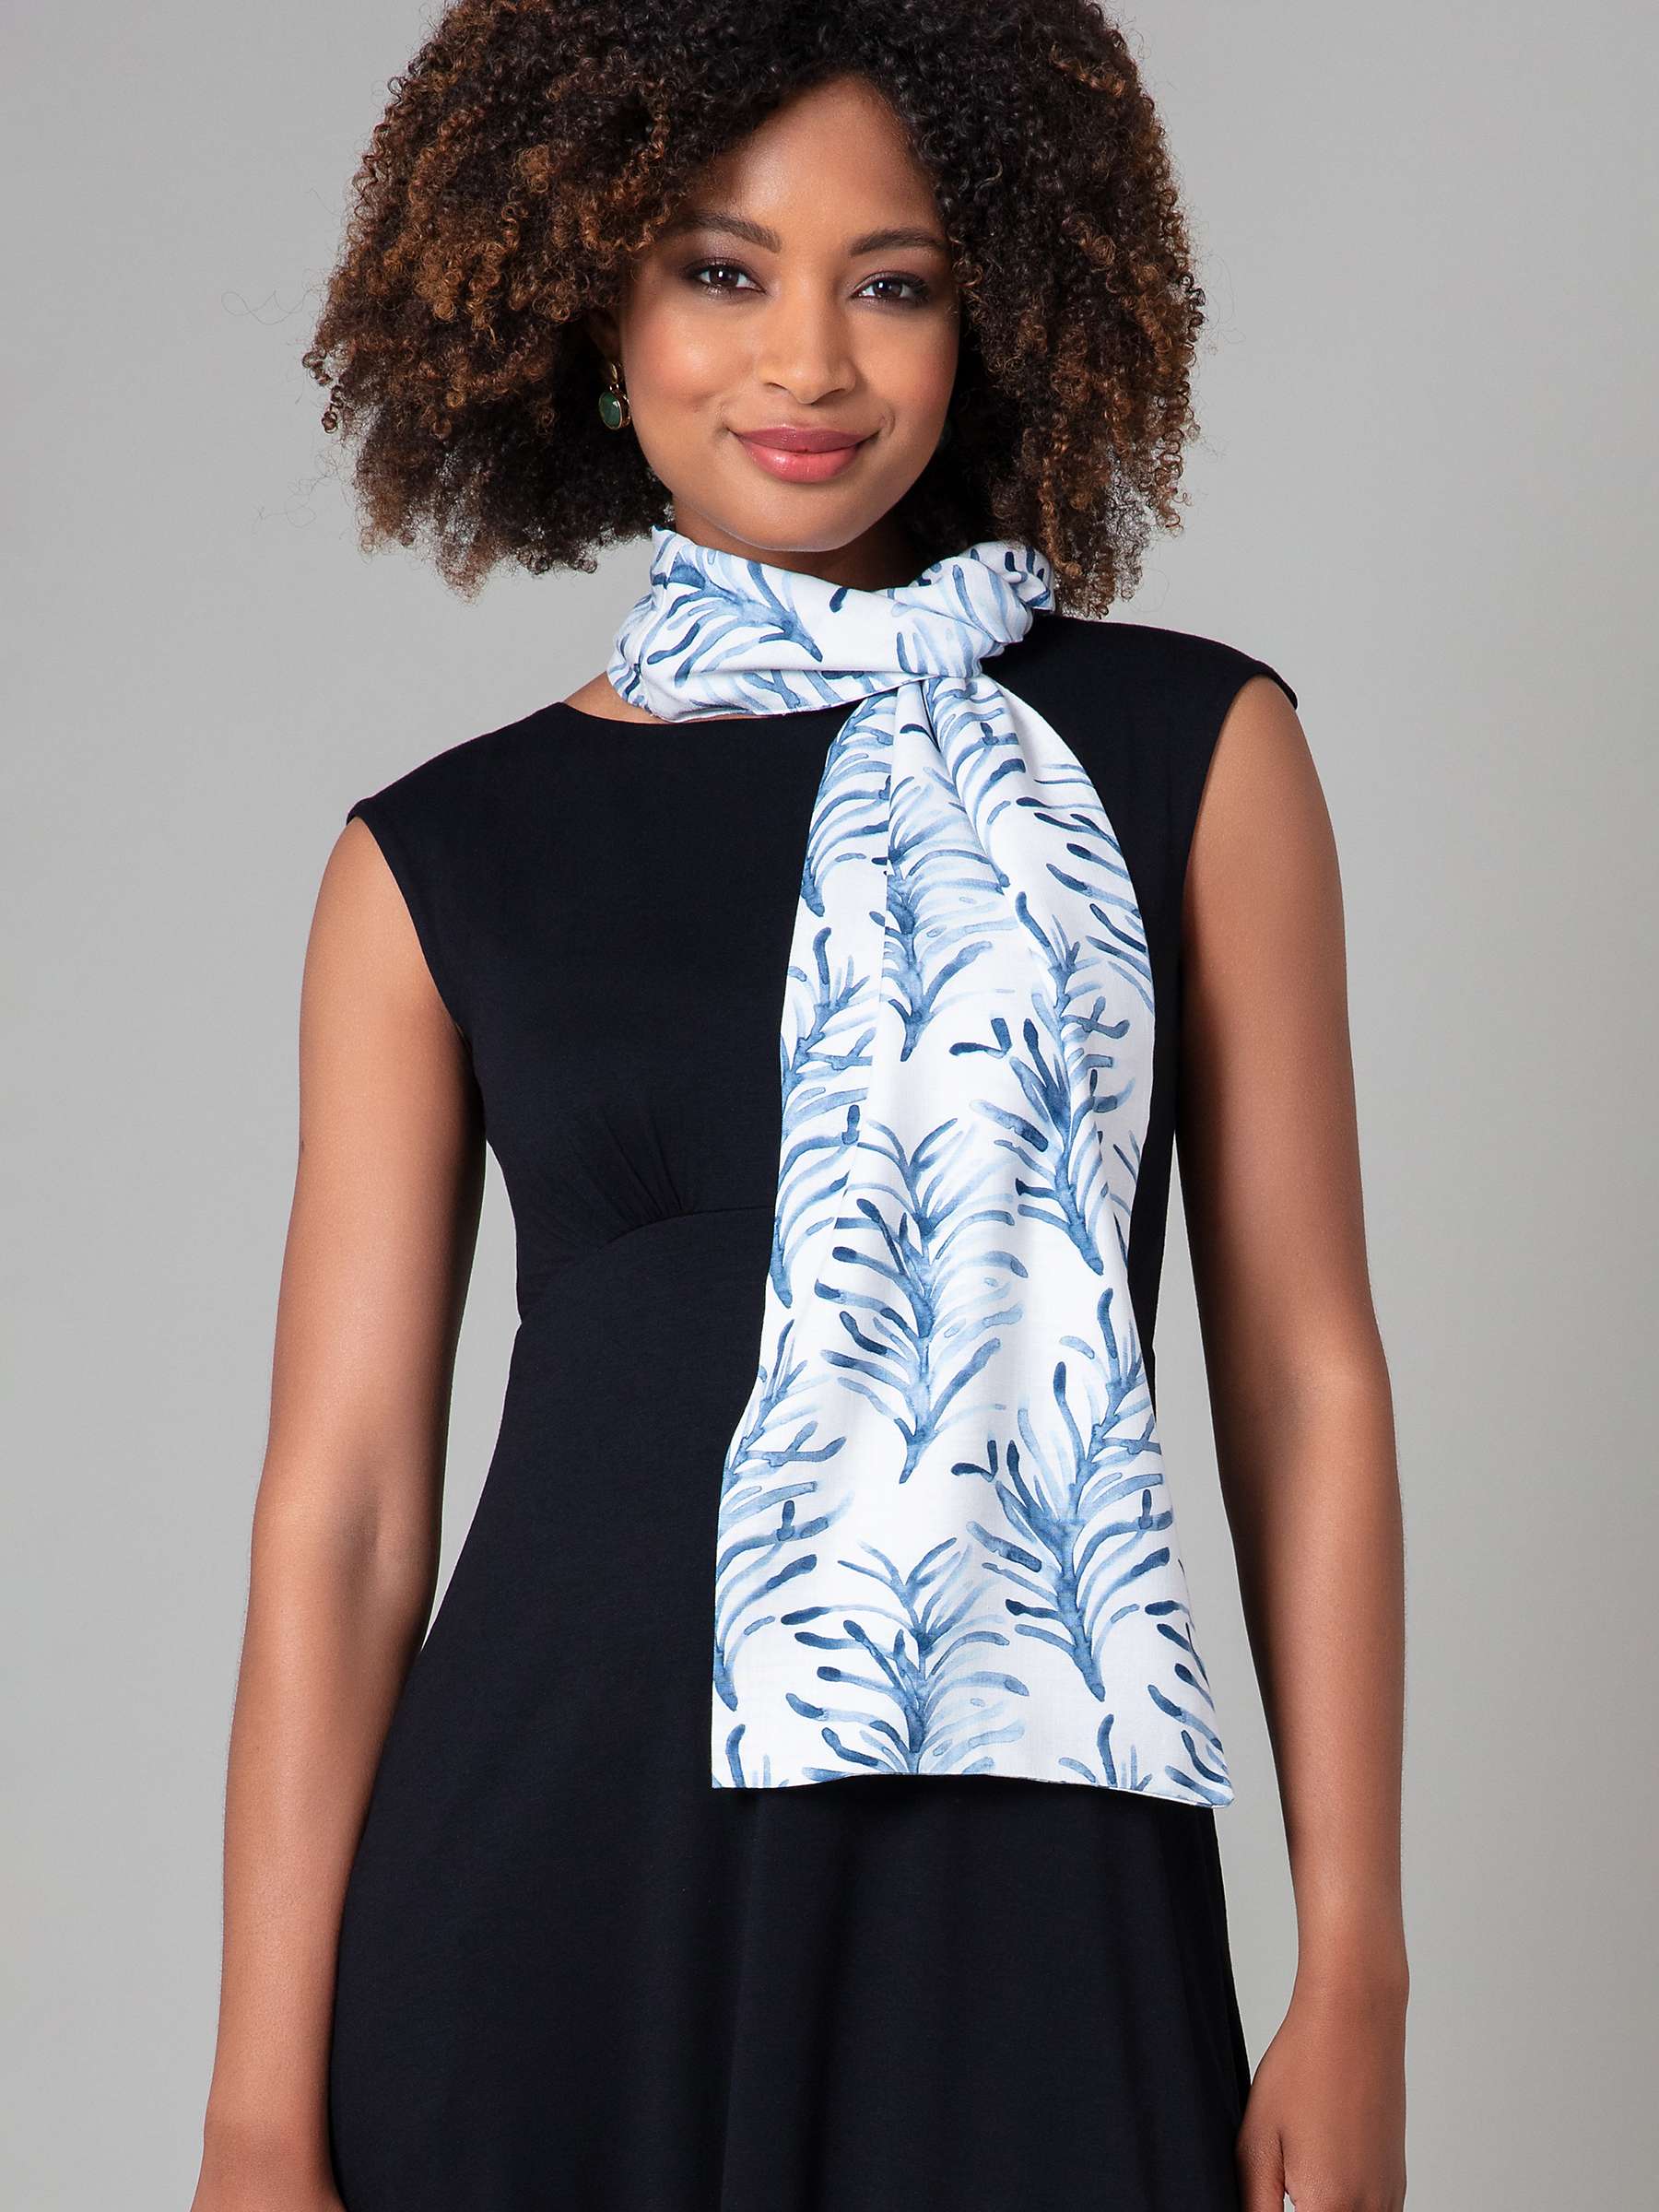 Buy Alie Street Azra Woven Scarf, Blue/White Floral Online at johnlewis.com